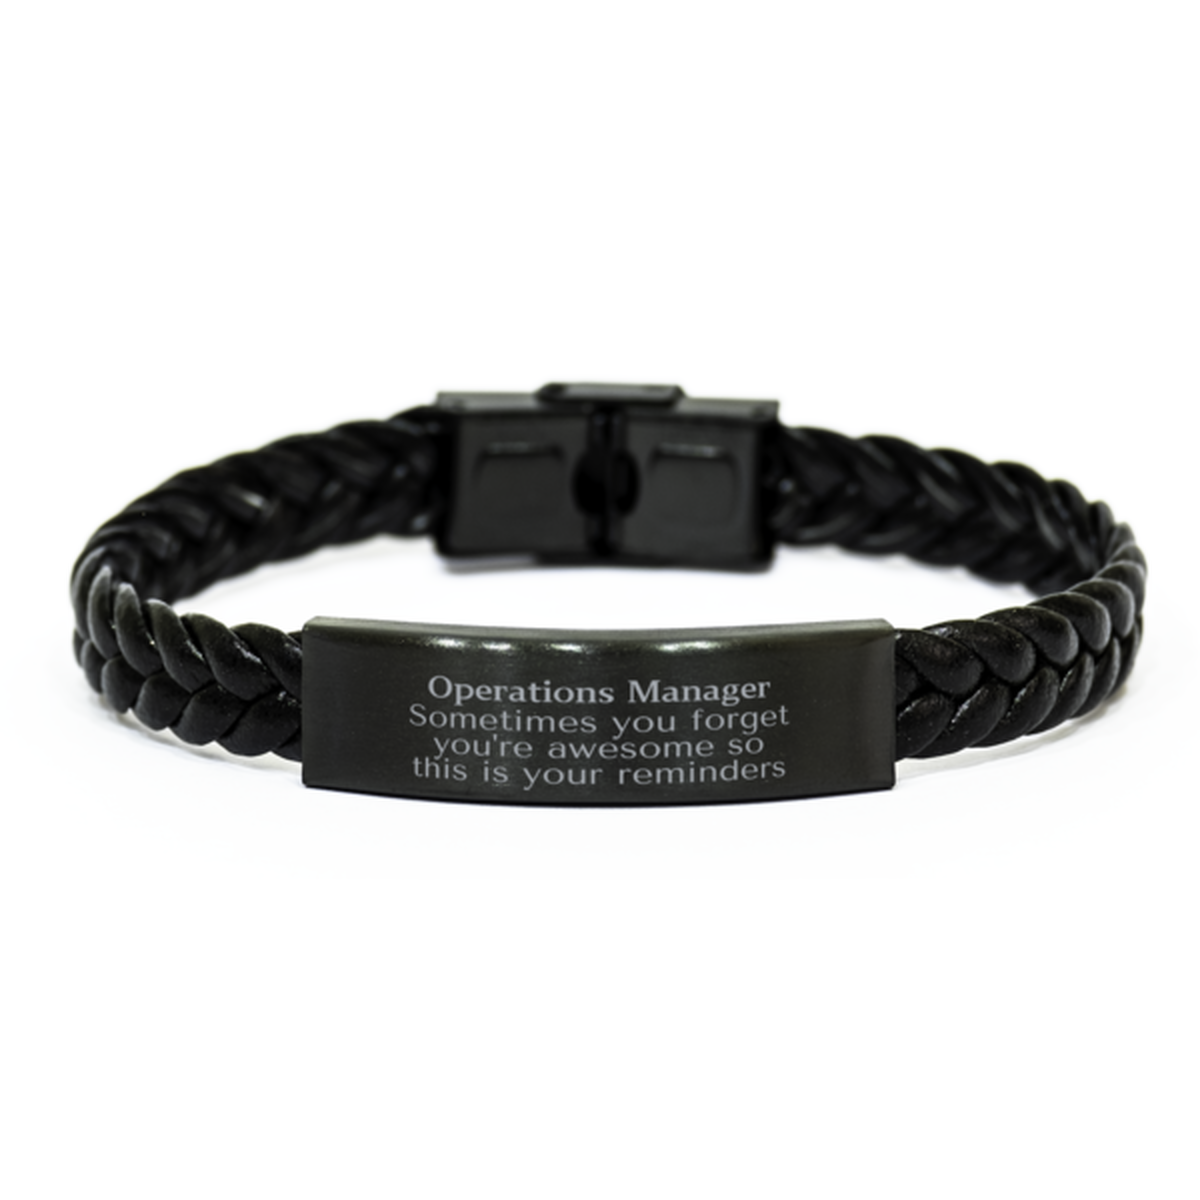 Sentimental Operations Manager Braided Leather Bracelet, Operations Manager Sometimes you forget you're awesome so this is your reminders, Graduation Christmas Birthday Gifts for Operations Manager, Men, Women, Coworkers